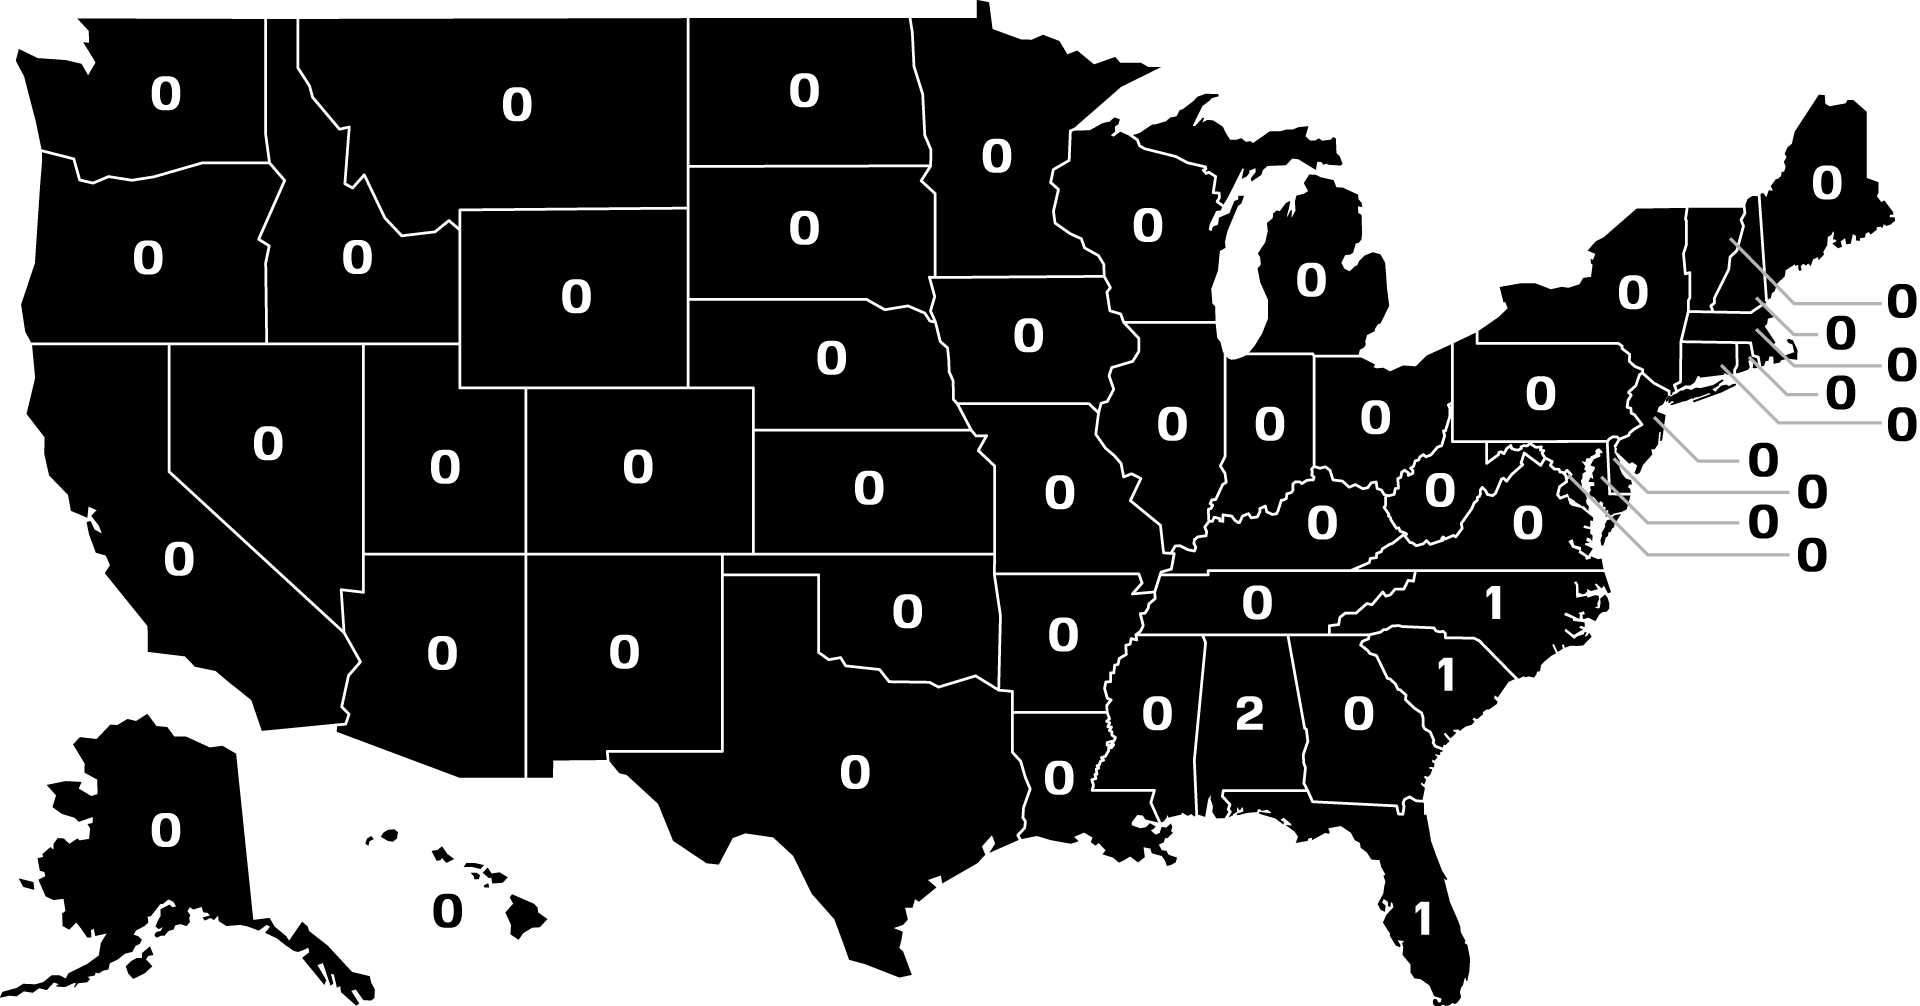 Outline map of US states with number of Neo Confederate groups.